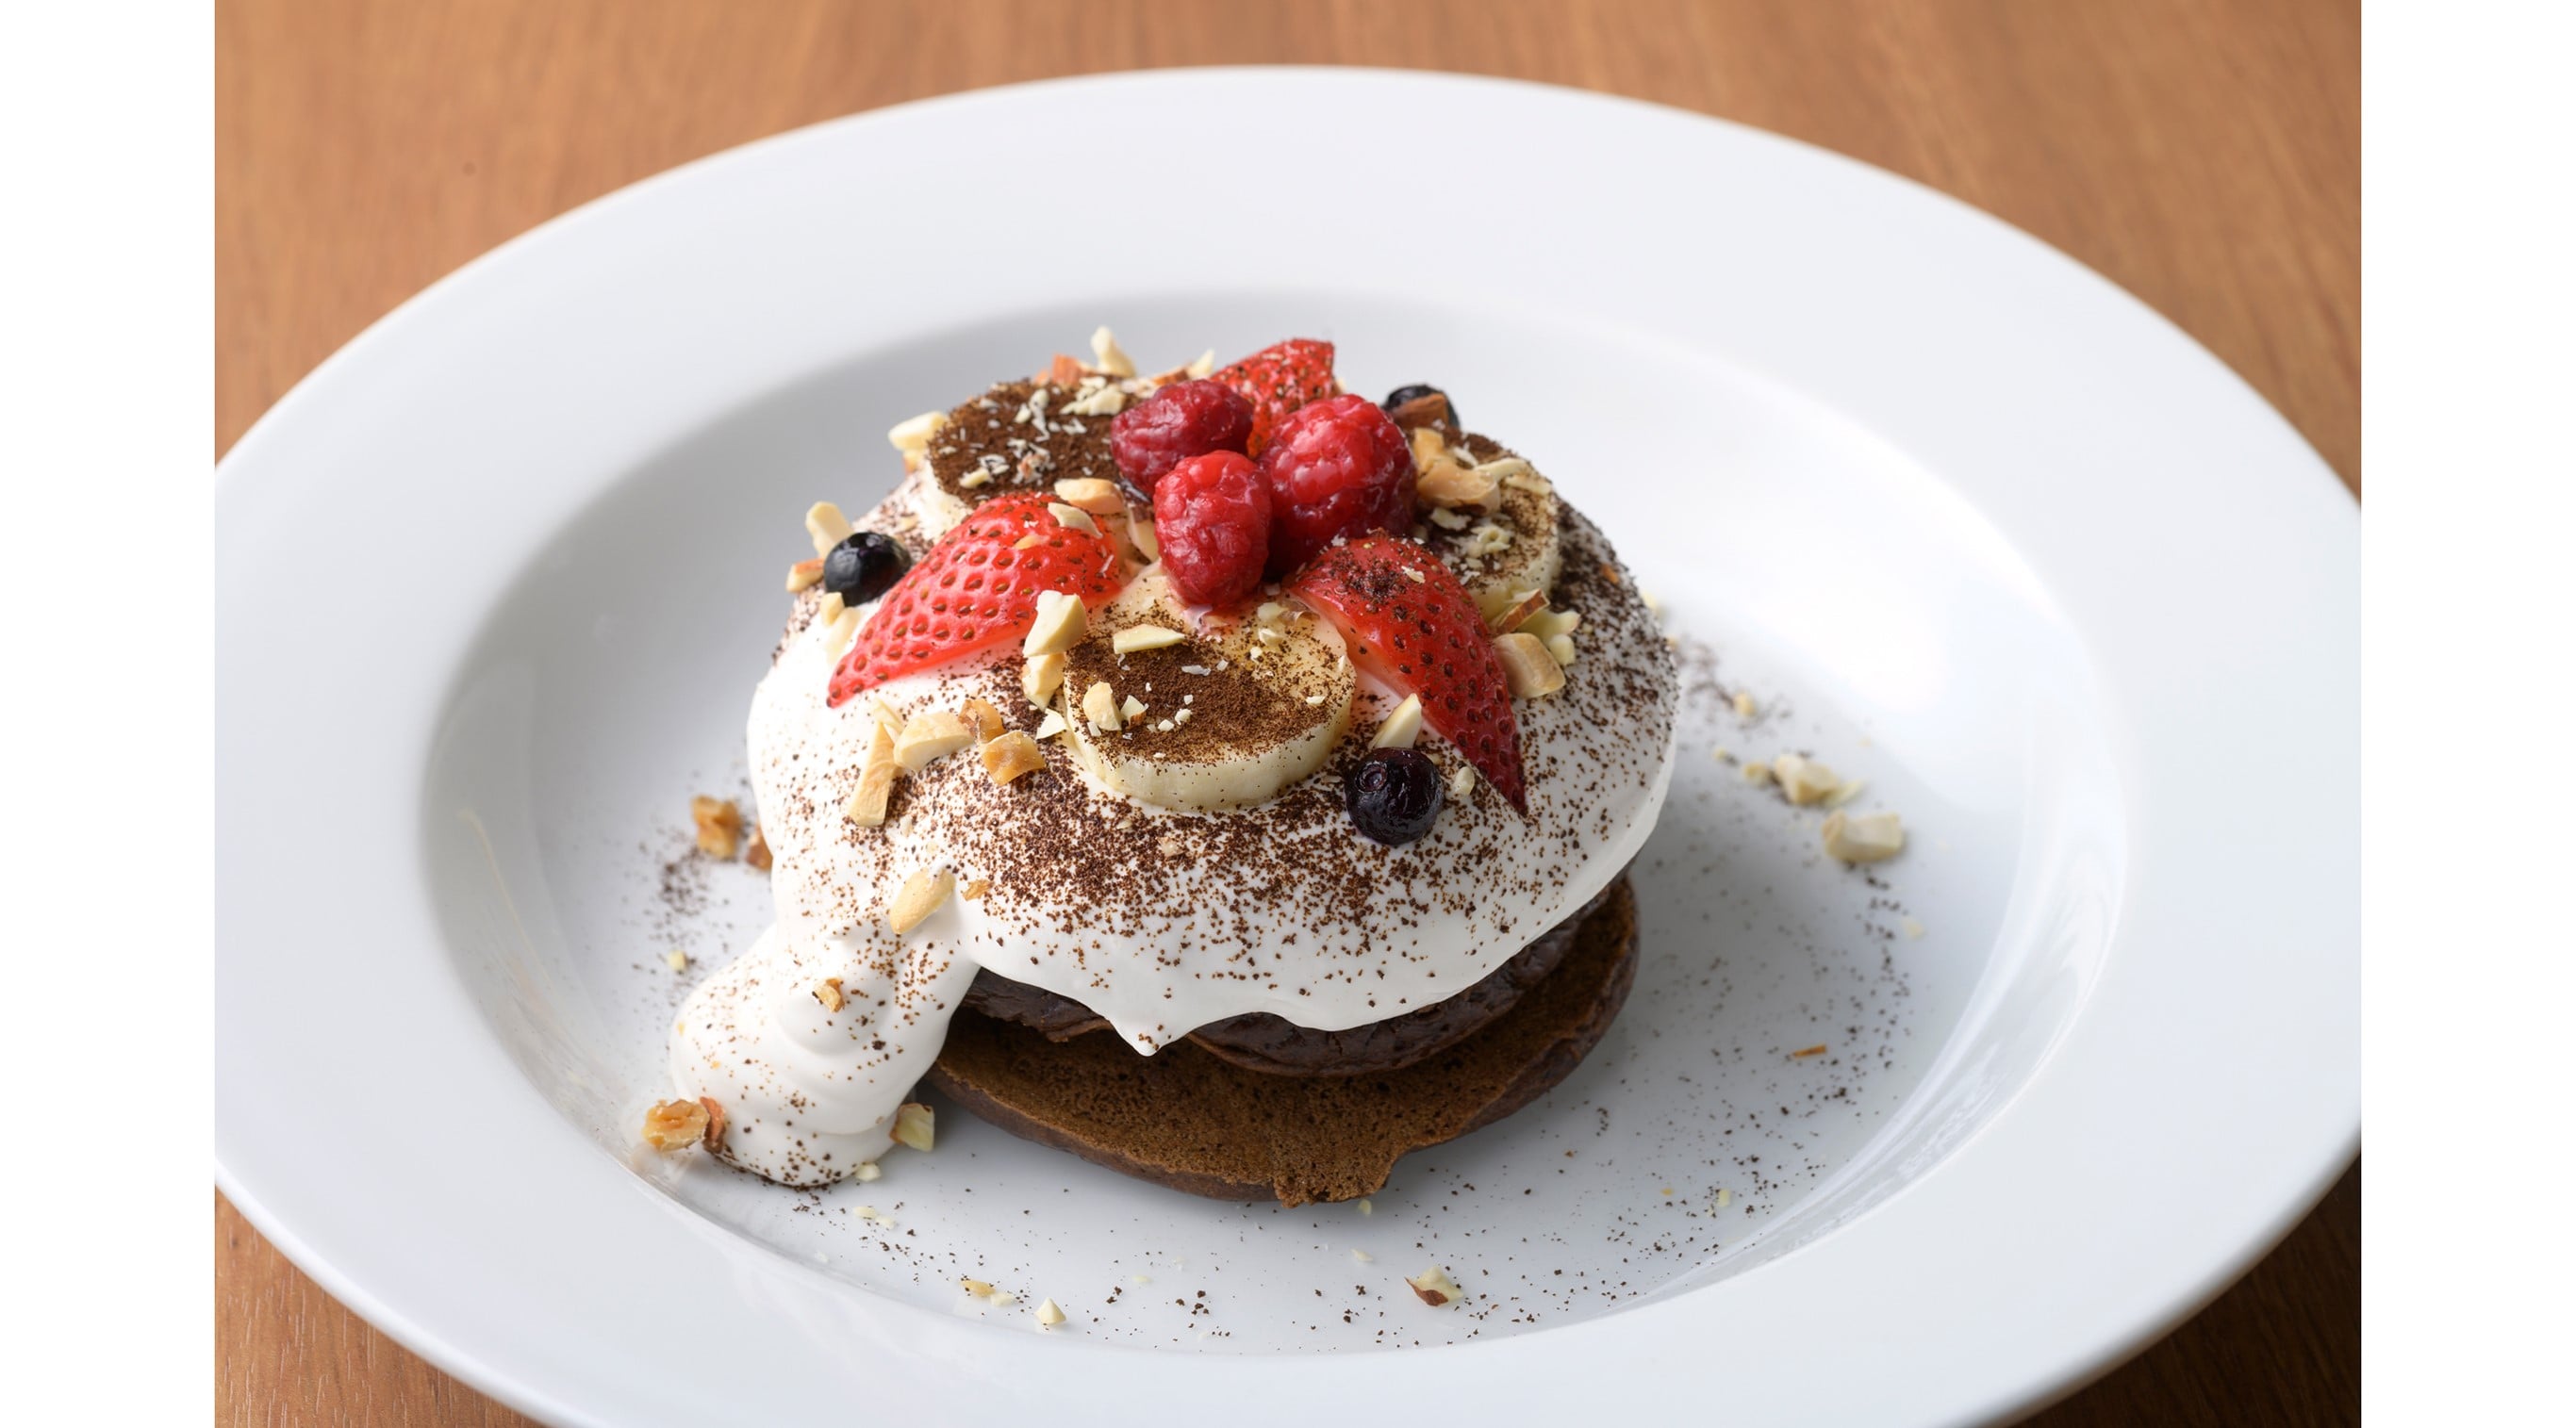 The Detox Brown Pancakes are made of roasted brown rice flour and they effectively detox the body.